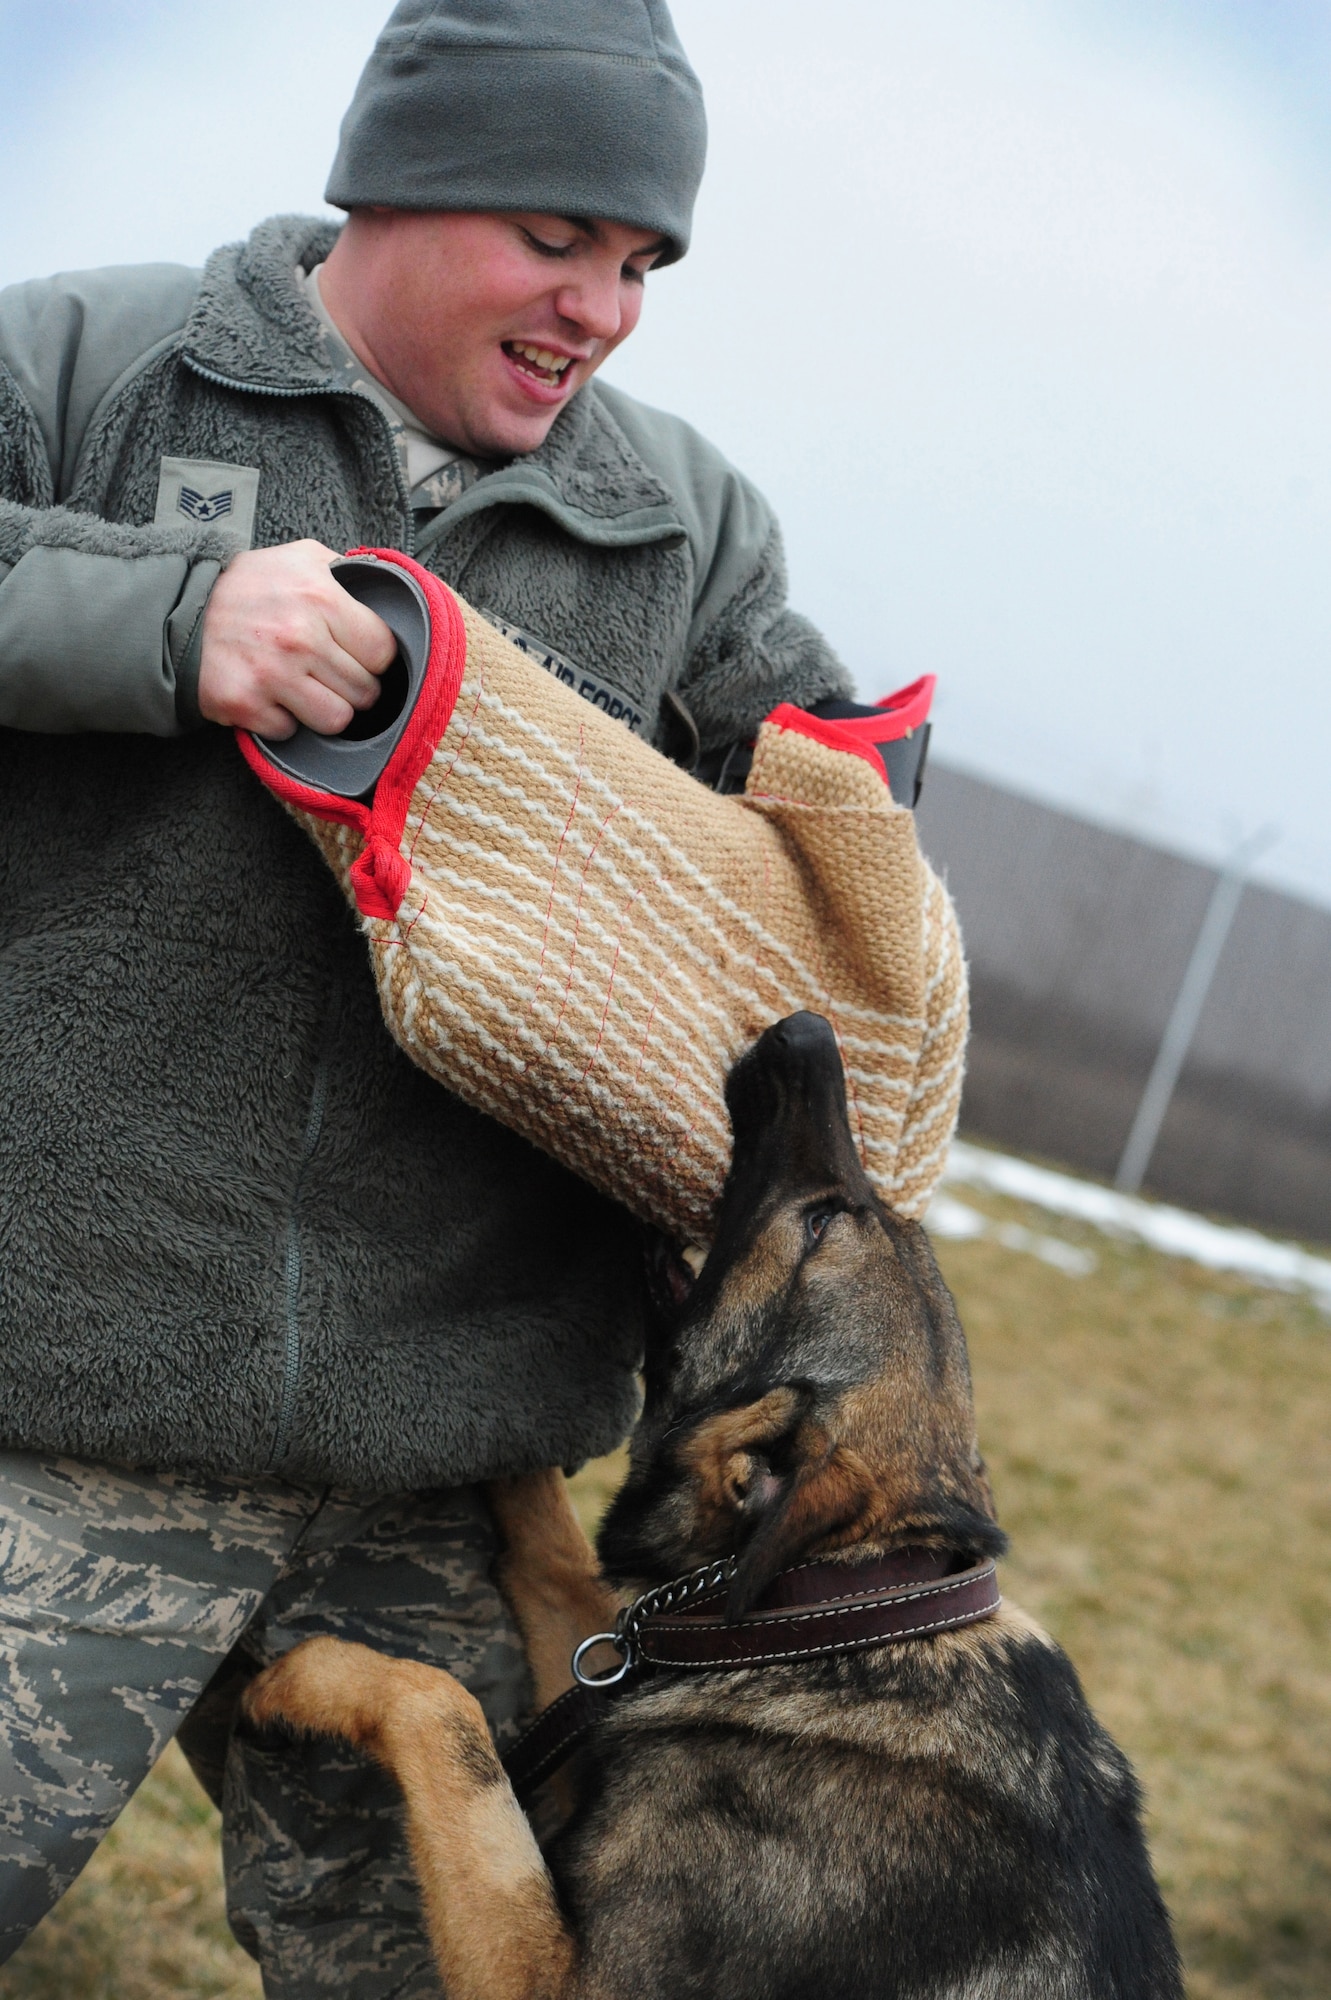 WHITEMAN AIR FORCE BASE, Mo. – Igore, 509th Security Forces Squadron military working dog, bites the sleeve of Staff Sgt. Adam Dye, 509th SFS MWD handler, during a bite sleeve scenario Feb. 15. Military working dogs are taught by their handlers to have controlled aggression through obedience courses and bite sleeve scenarios. (U.S. Air Force photo/Senior Airman Nick Wilson)